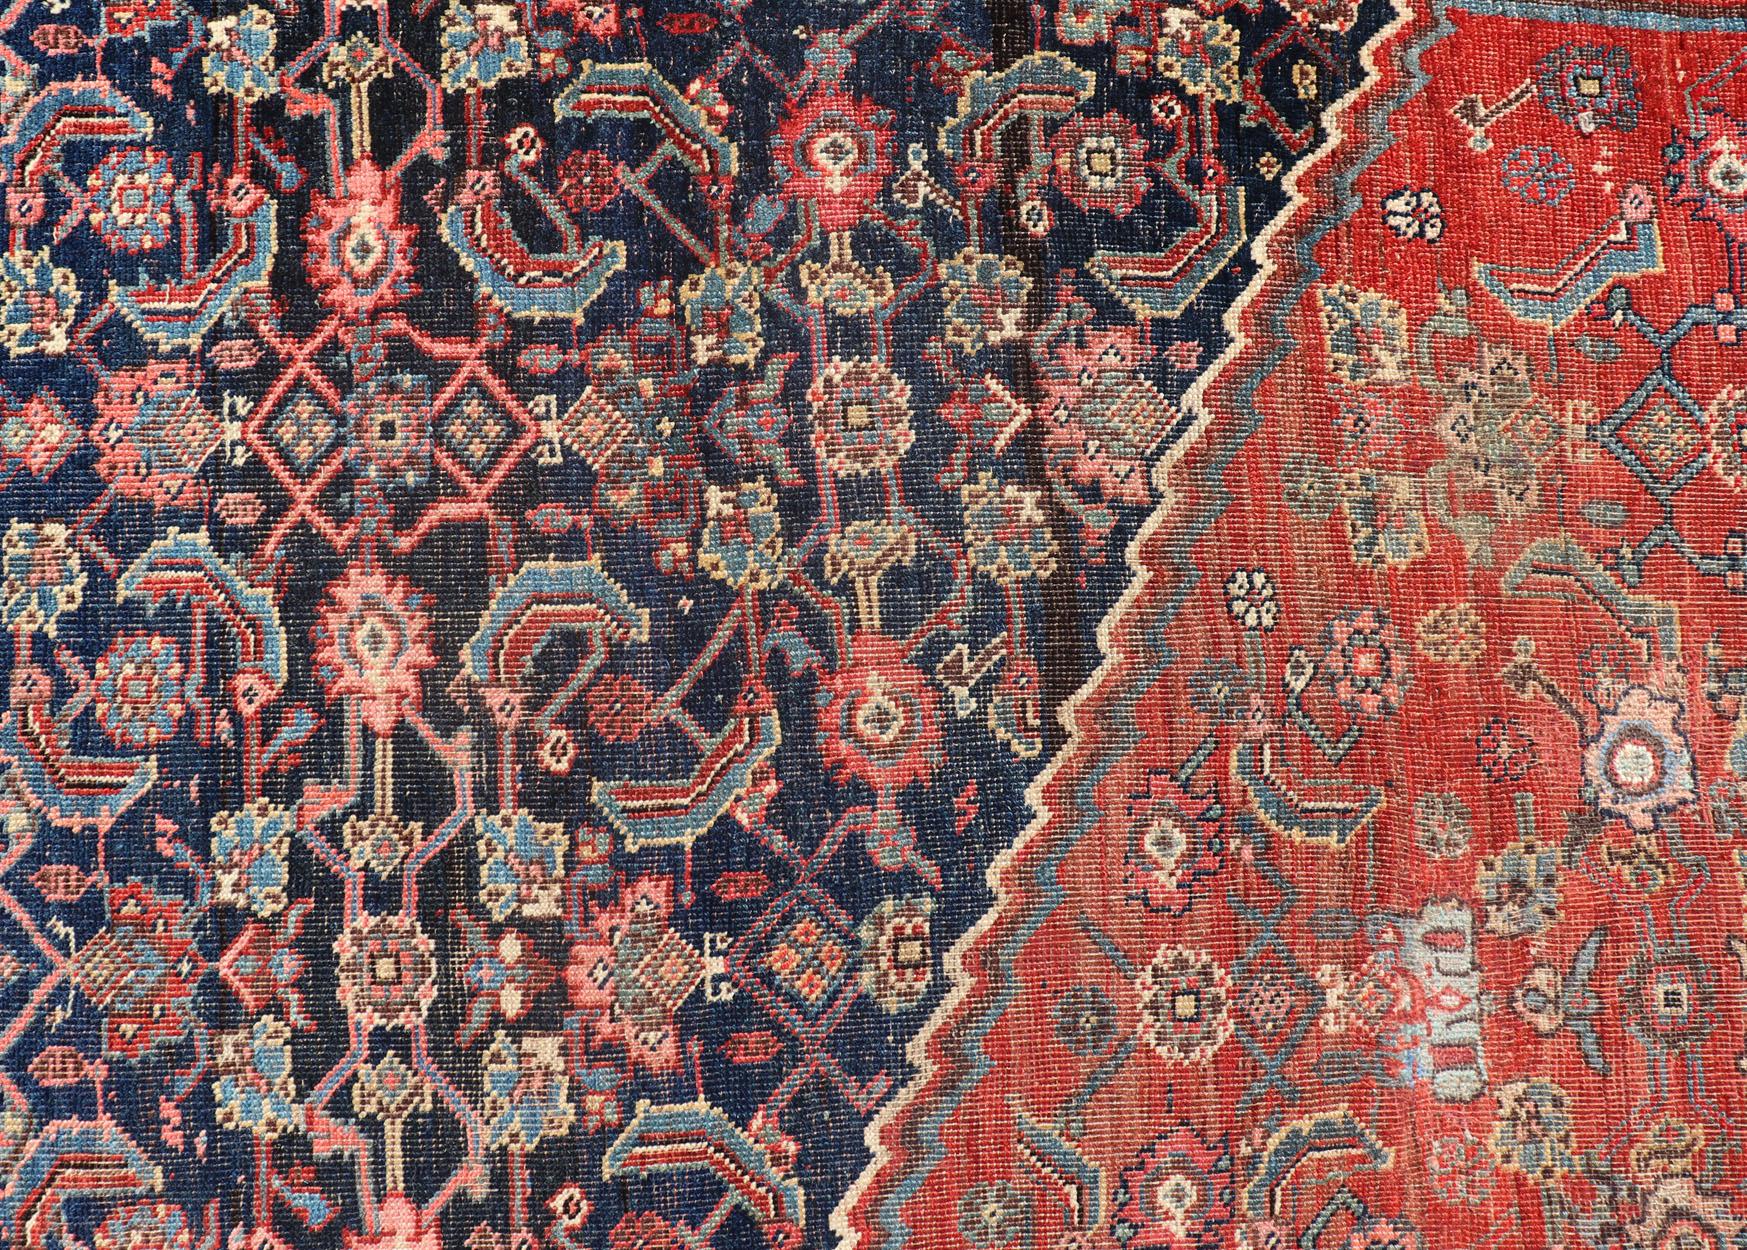 Very Large Antique Persian Bidjar Rug in Multi Shades of Blue, Tera-Cotta & Red For Sale 2